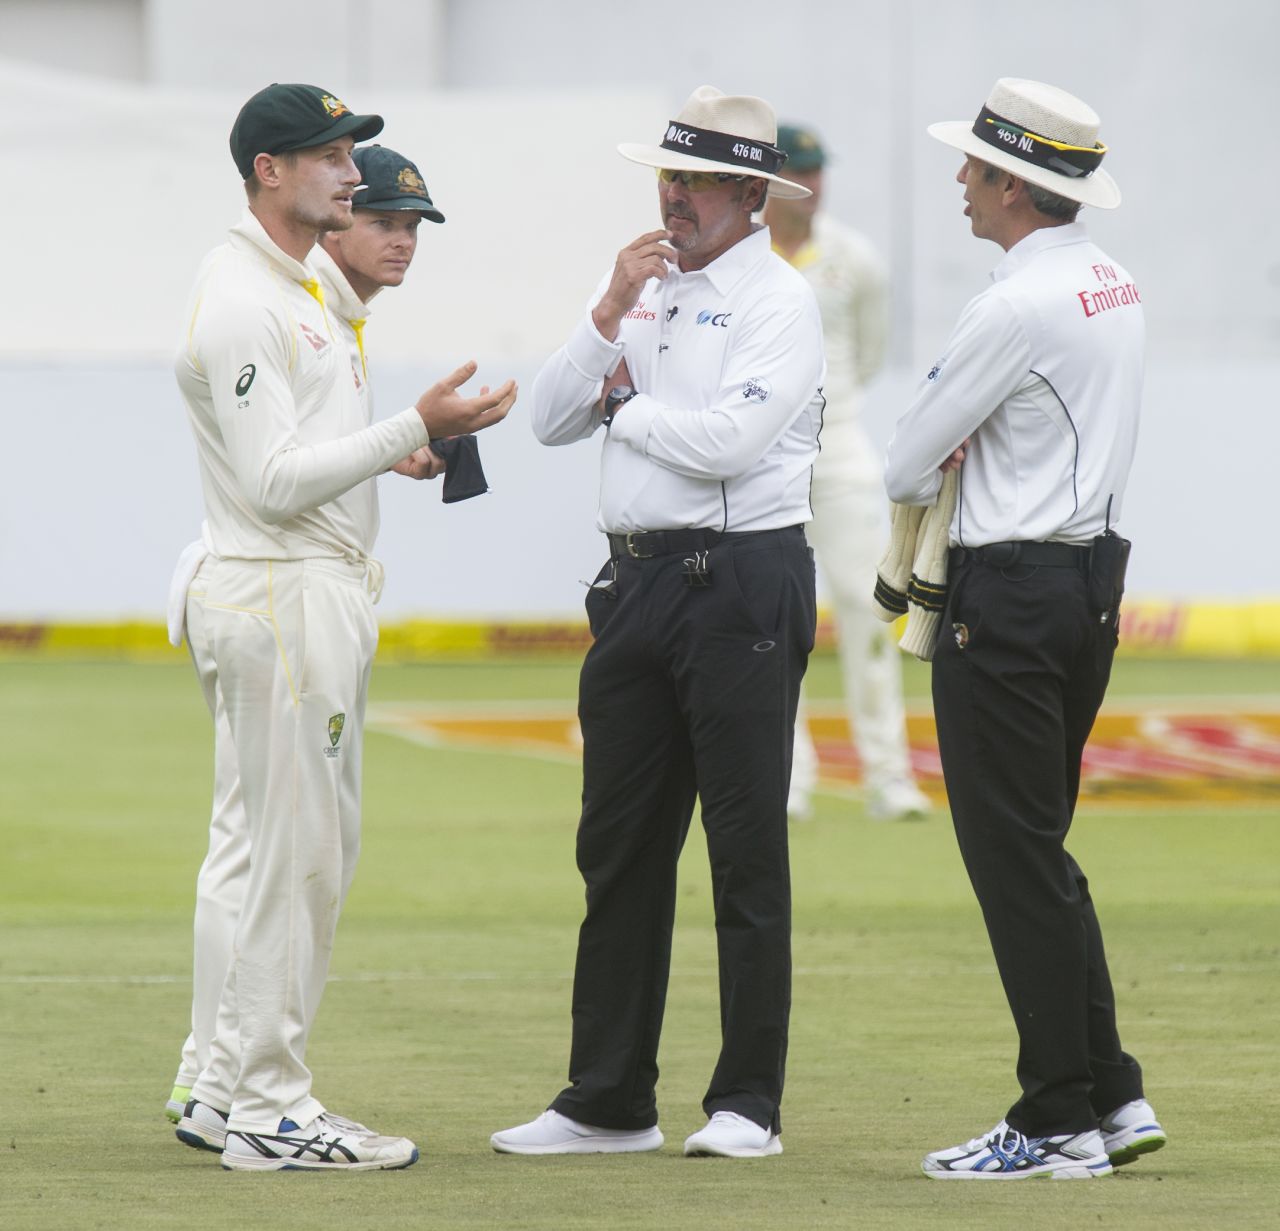 Cameron Bancroft shows a black piece of cloth to the umpires, South Africa v Australia, 3rd Test, Cape Town, 3rd day, March 24, 2018